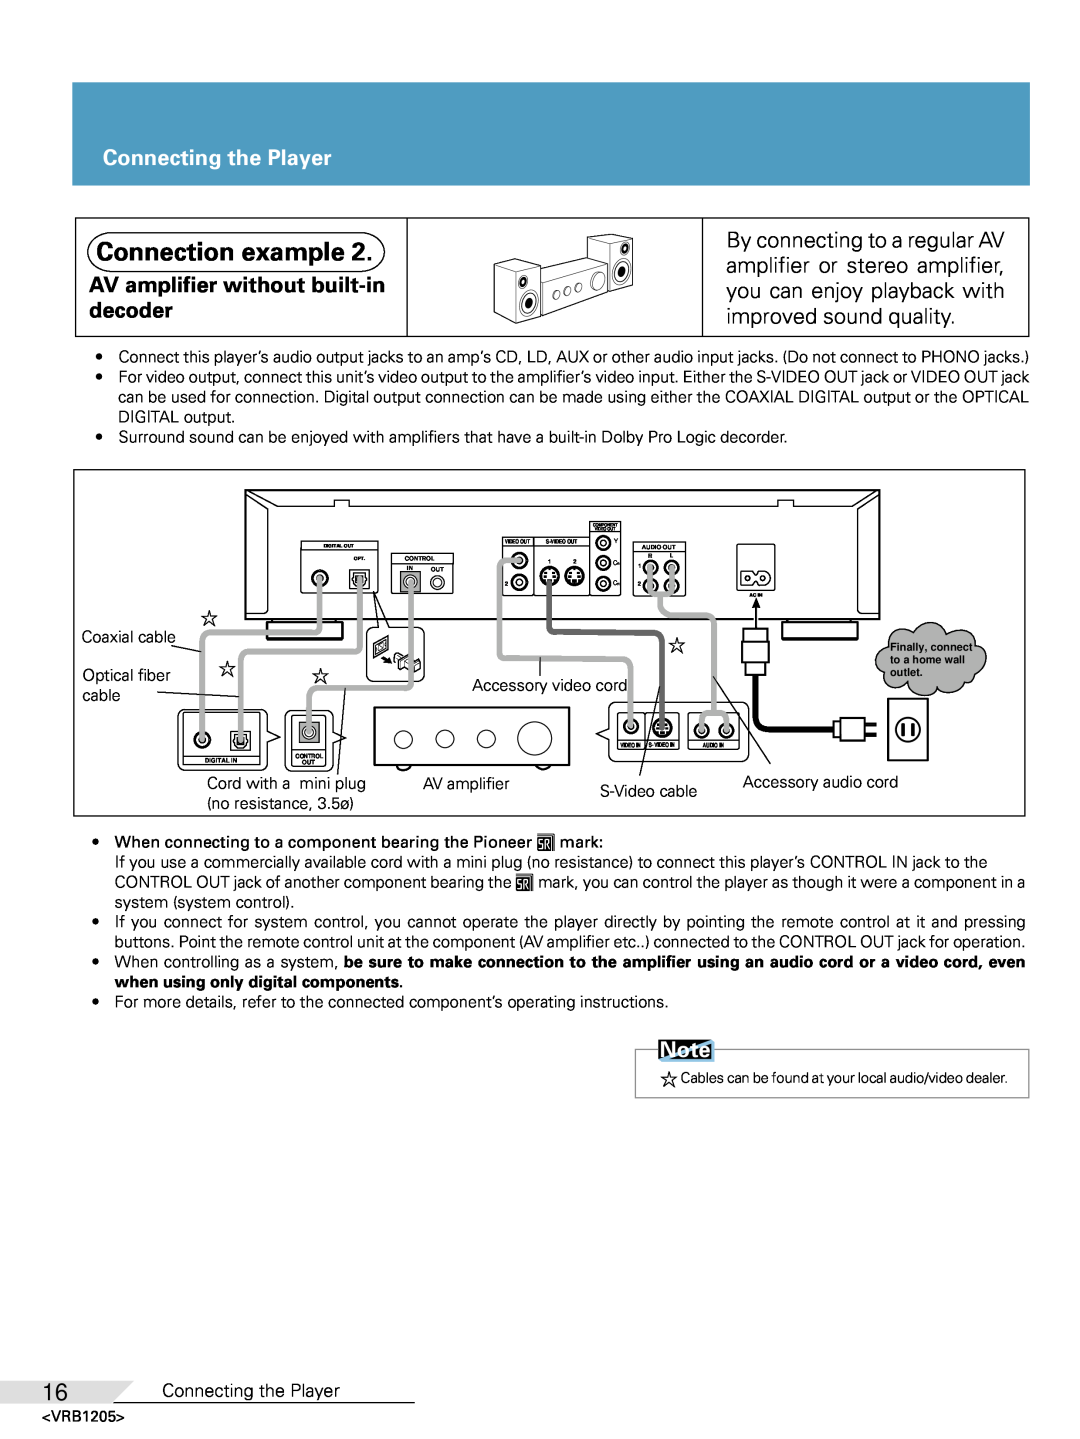 Pioneer DV-05 operating instructions Connection example, Connecting the Player, AV amplifier without built-in decoder 